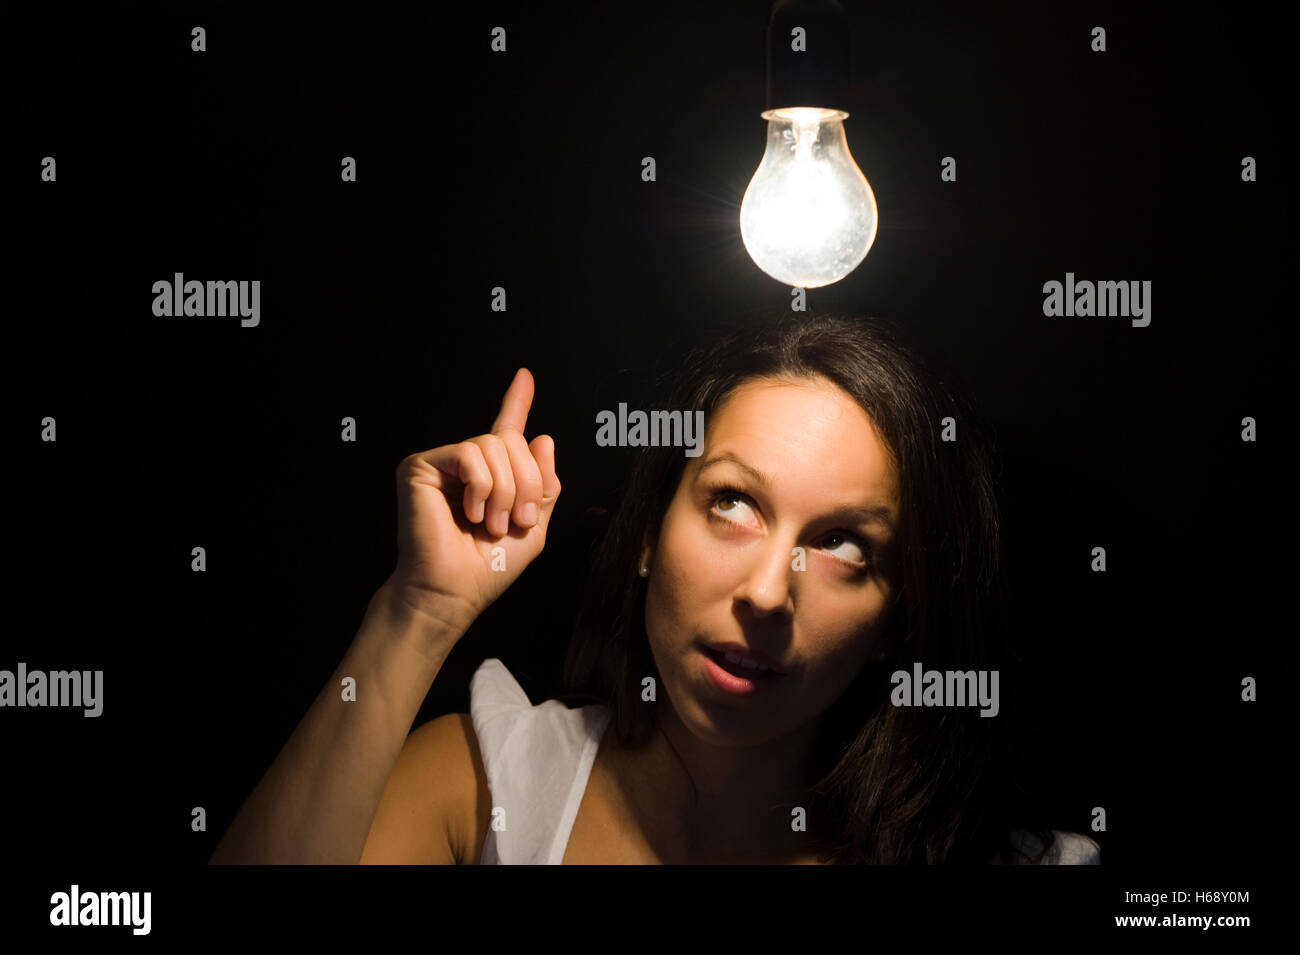 Woman, light bulb, symbolic image for enlightenment Stock Photo